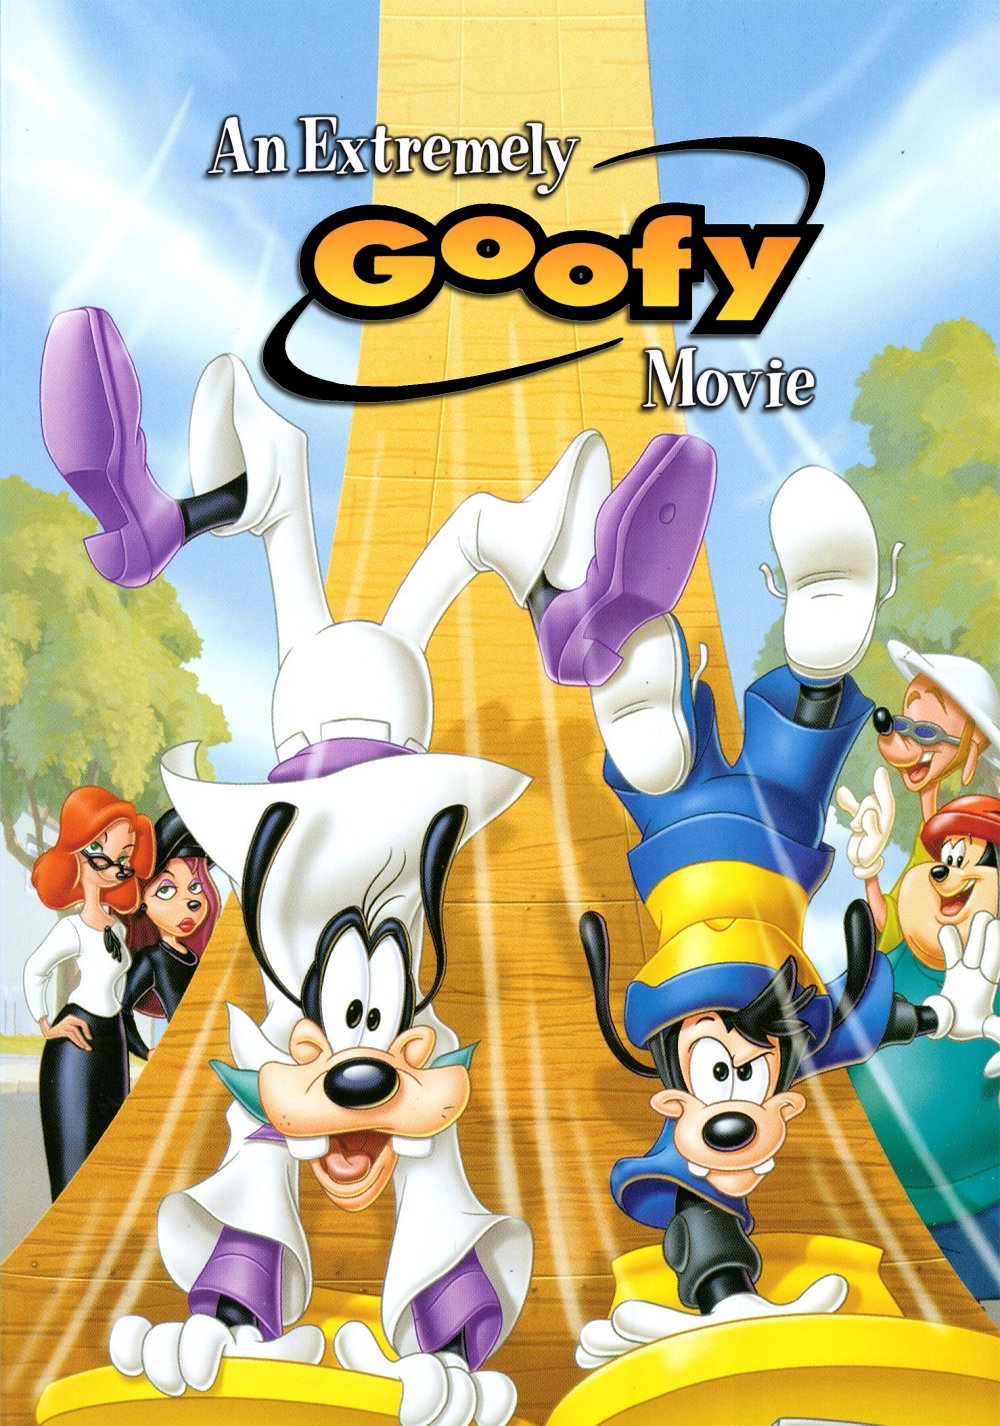 L'affiche du film An Extremely Goofy Movie